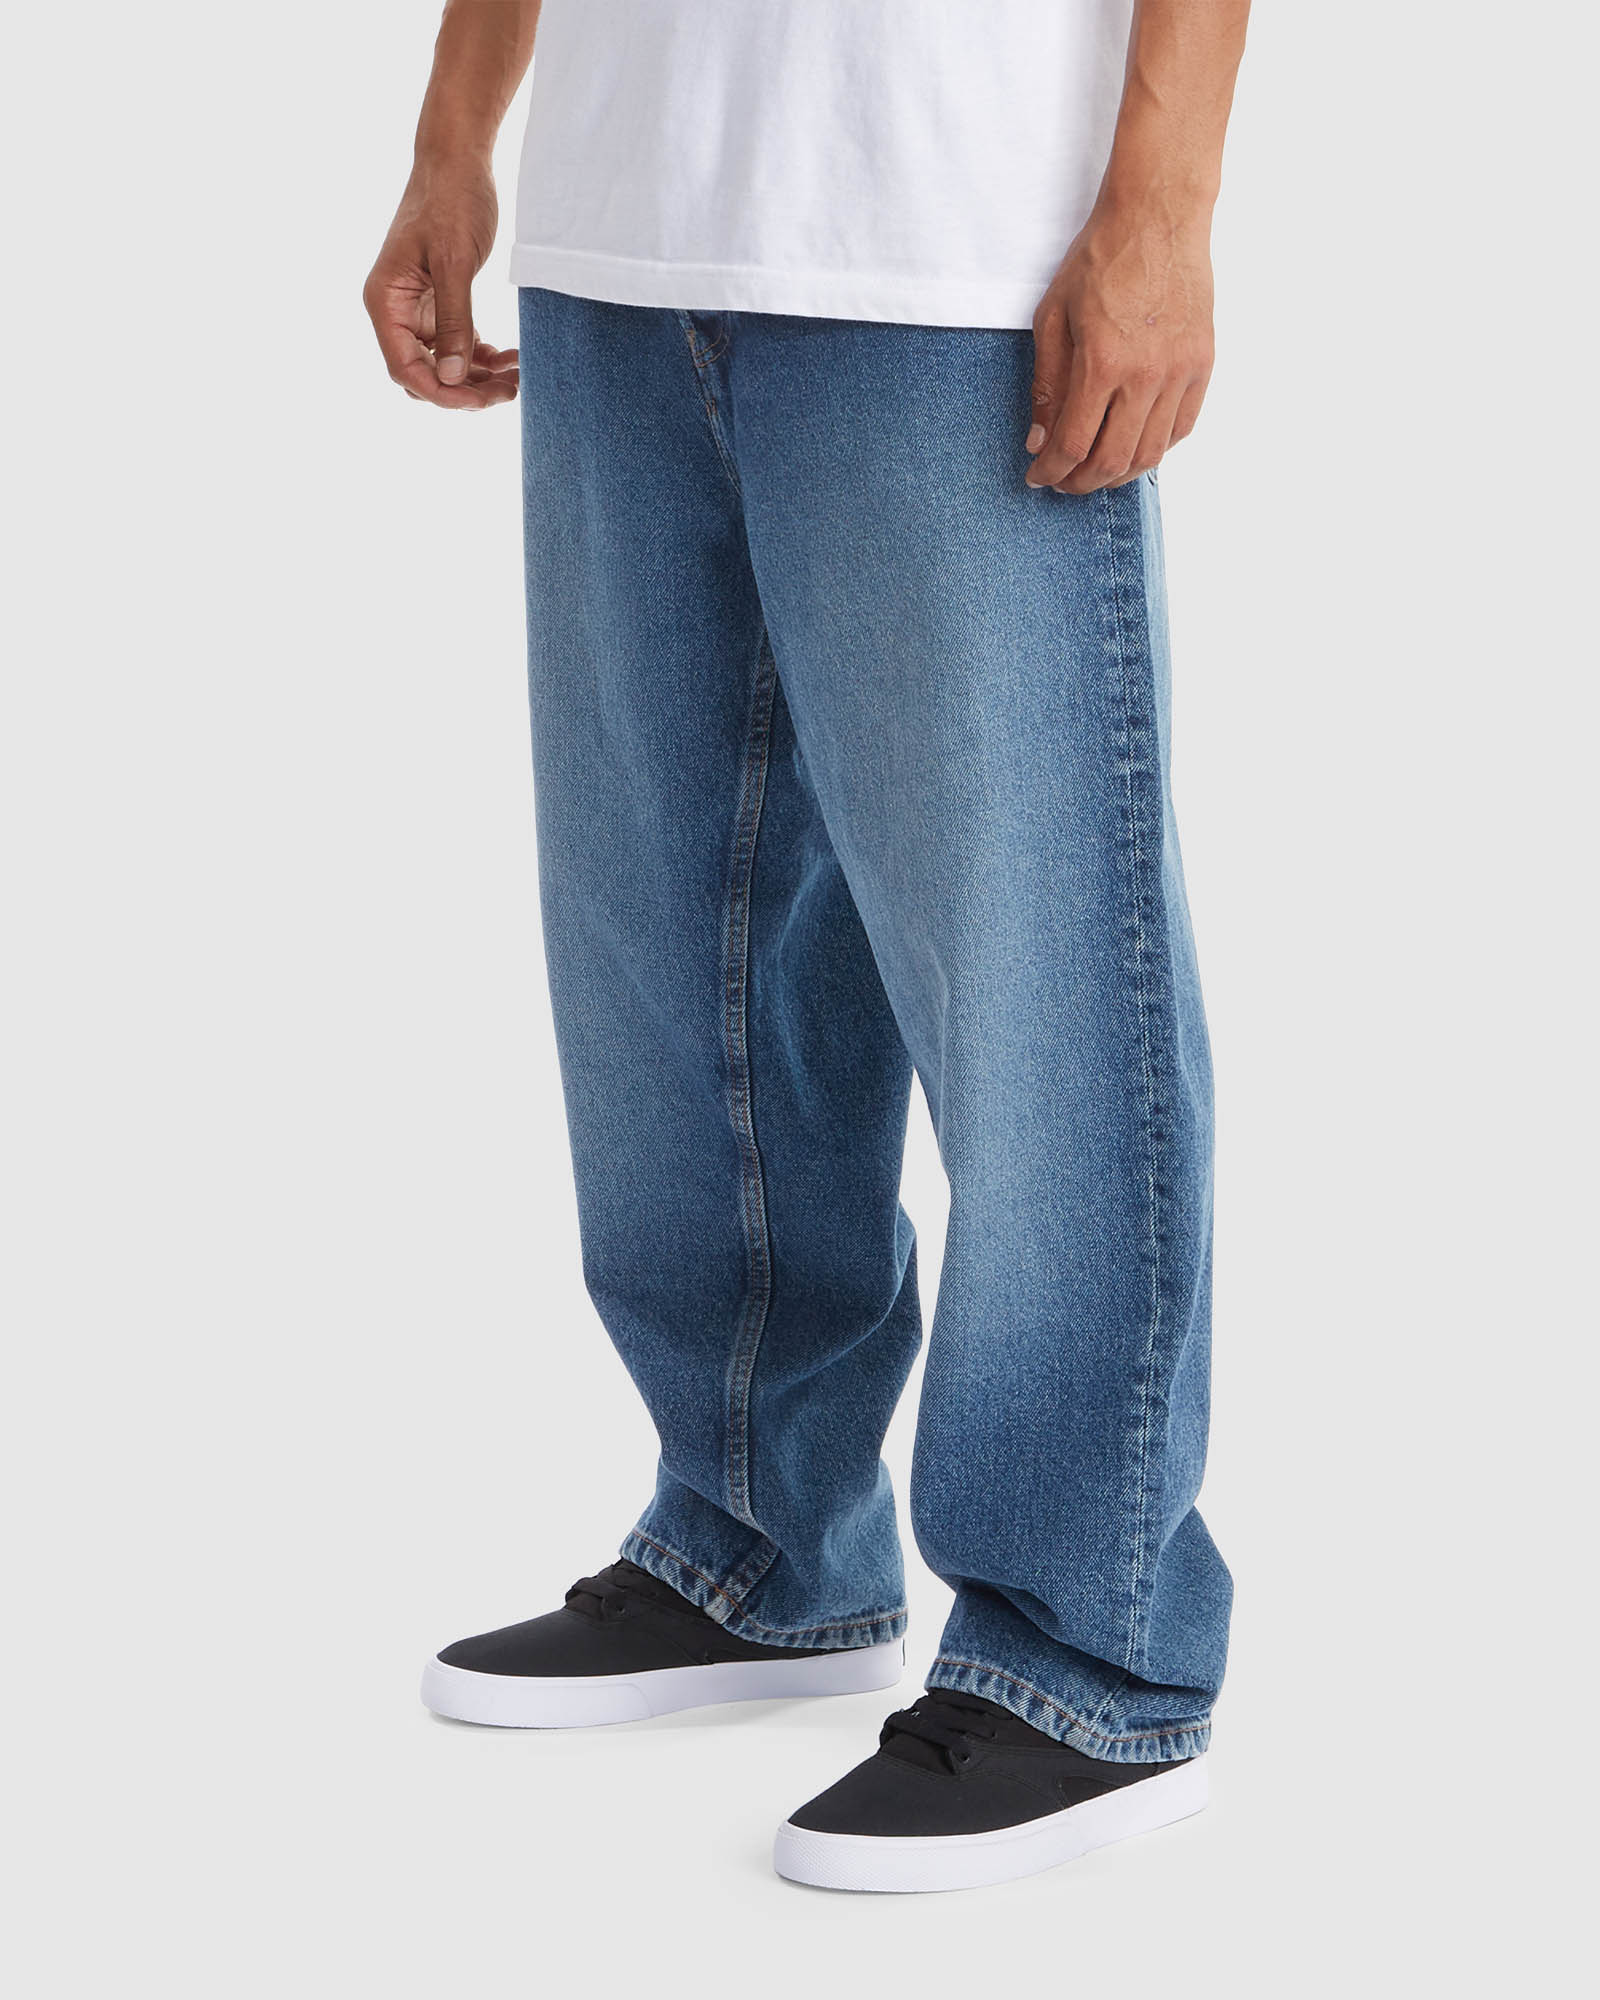 Mens Worker Baggy Jeans by DC SHOES | Surf, Dive 'N' Ski